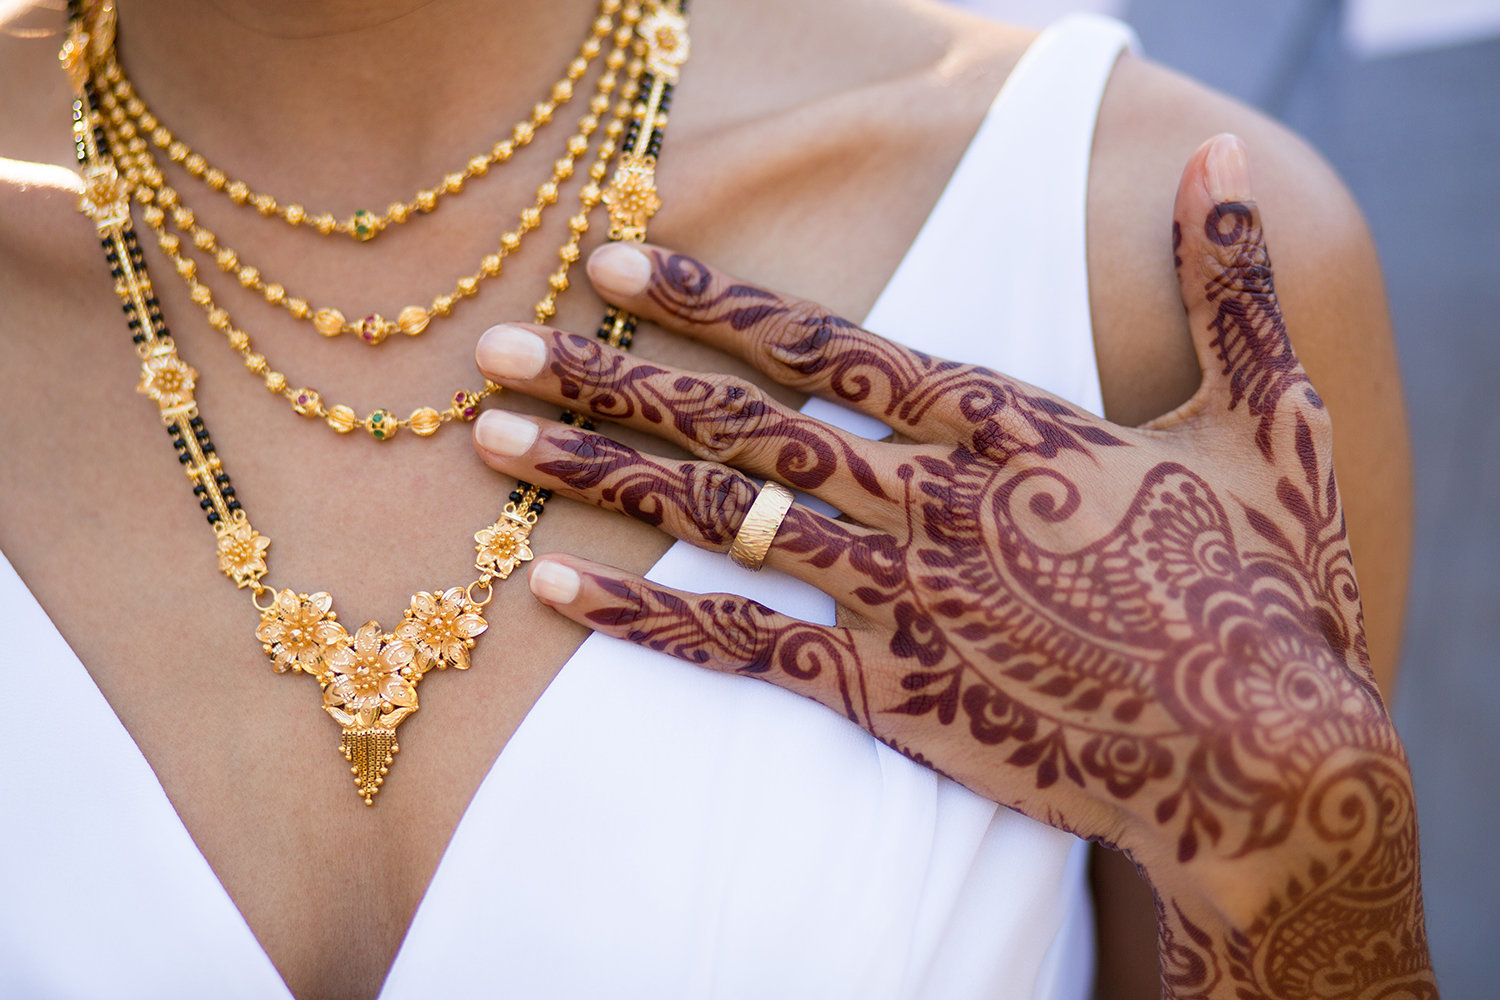 Detail on Henna and Jewelry at an Indian Hindu Wedding Ceremony